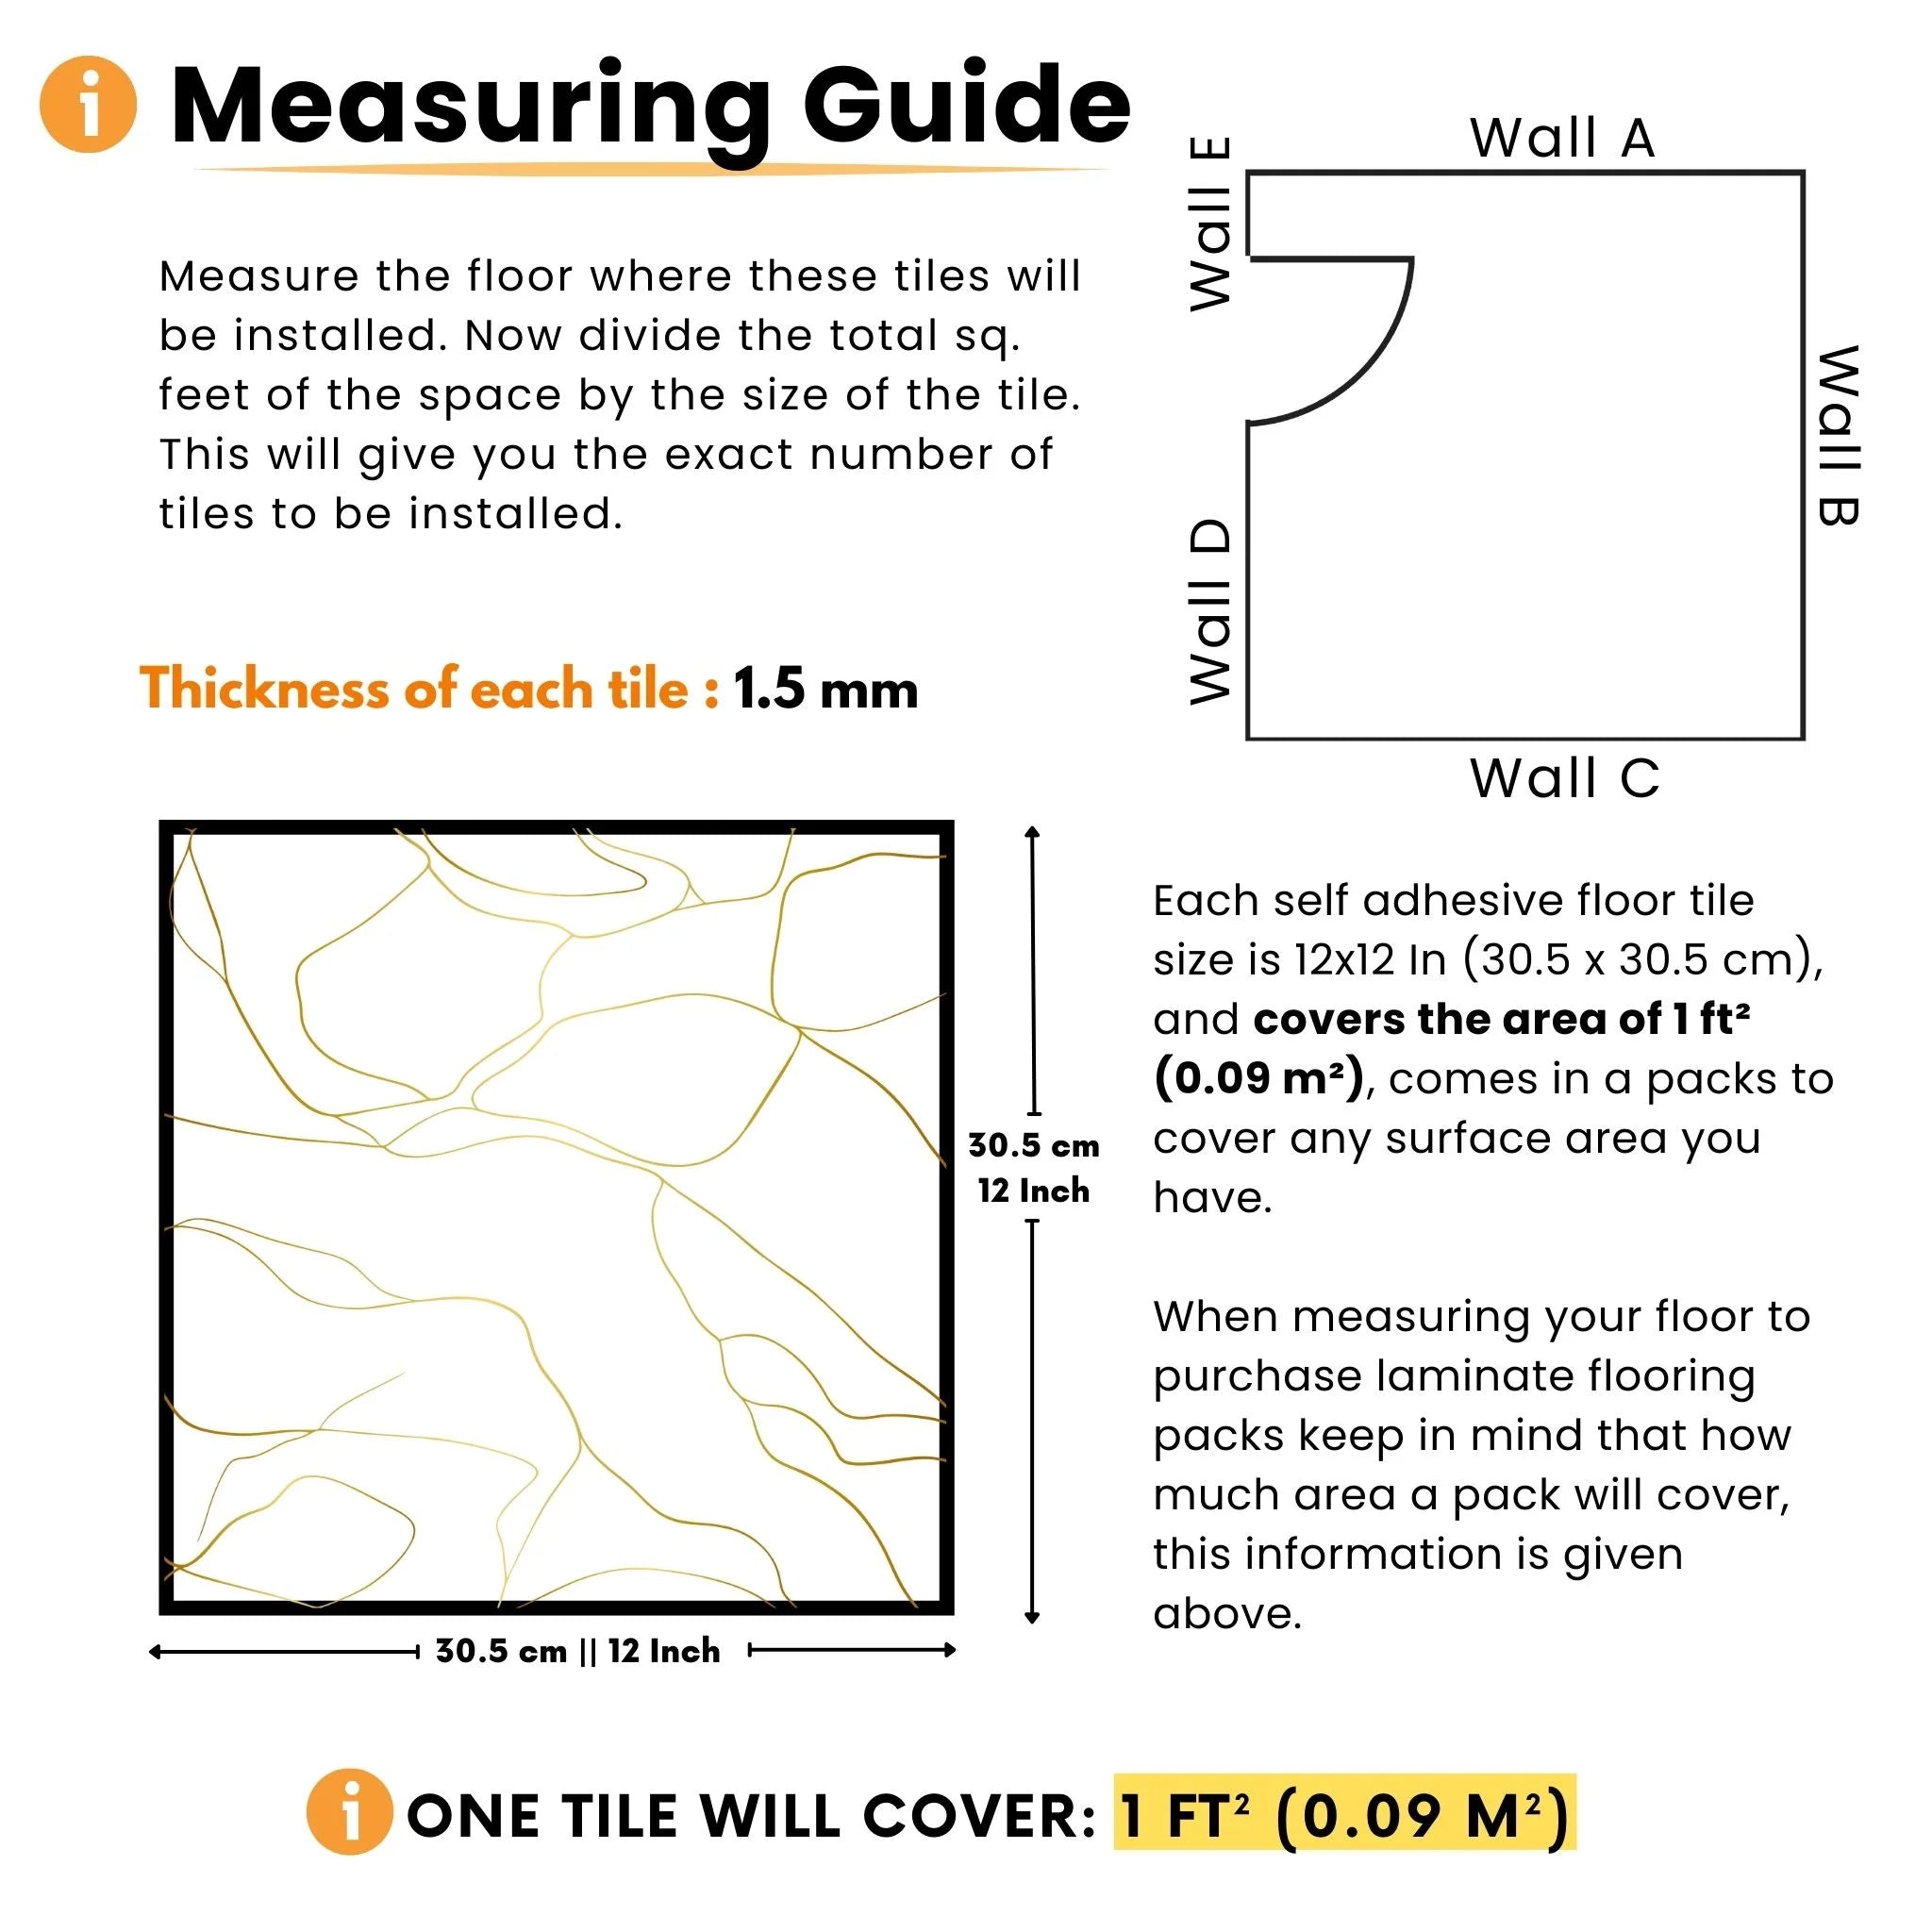 measuring guide for self-adhesive floor planks with details on thickness and packaging